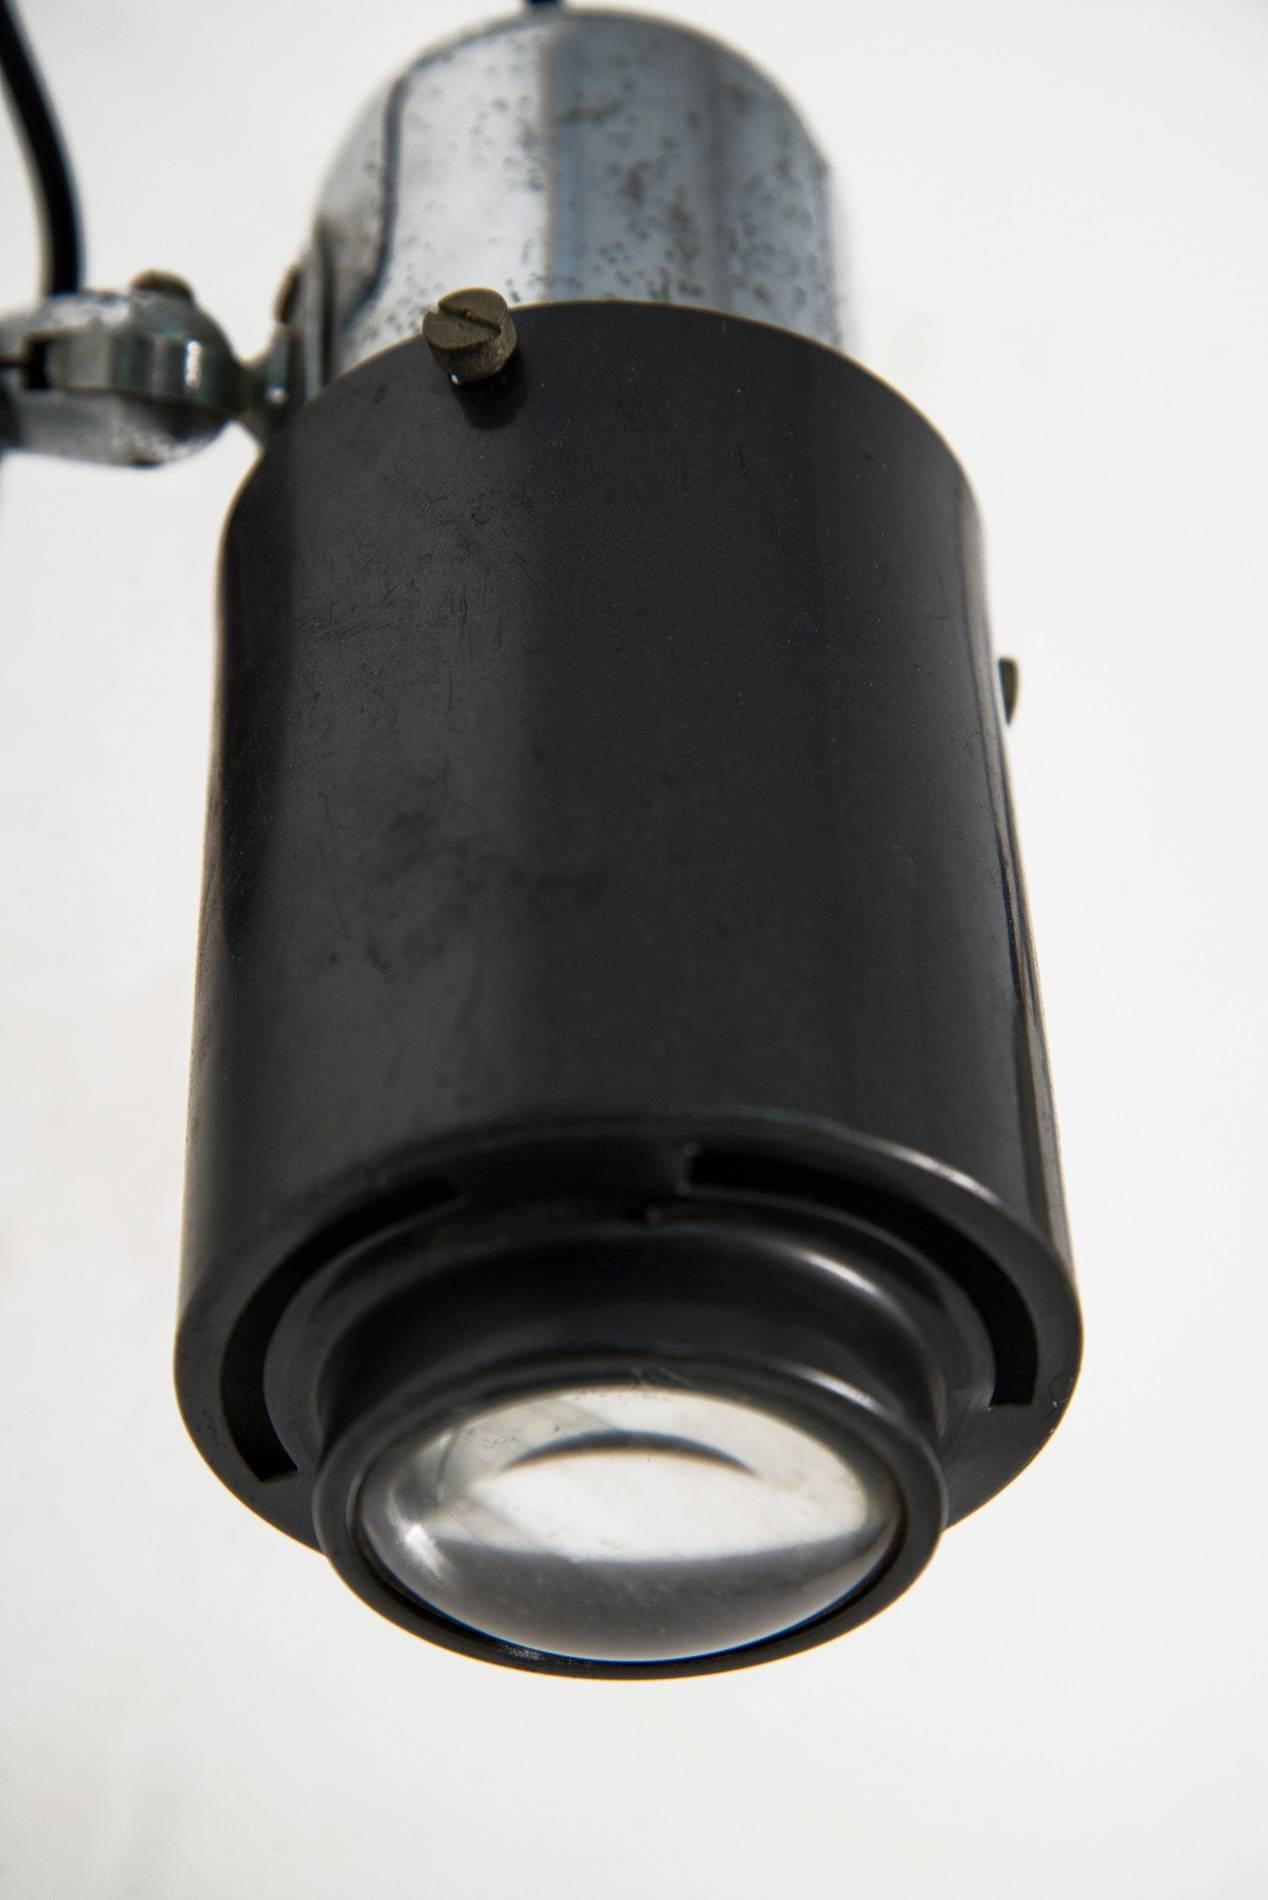 Adjustable wall light designed by Jacques Biny for Lita, France, in the 1950s. Black lacquered and nickel plated structure, glass lens. Good original vintage conditions.